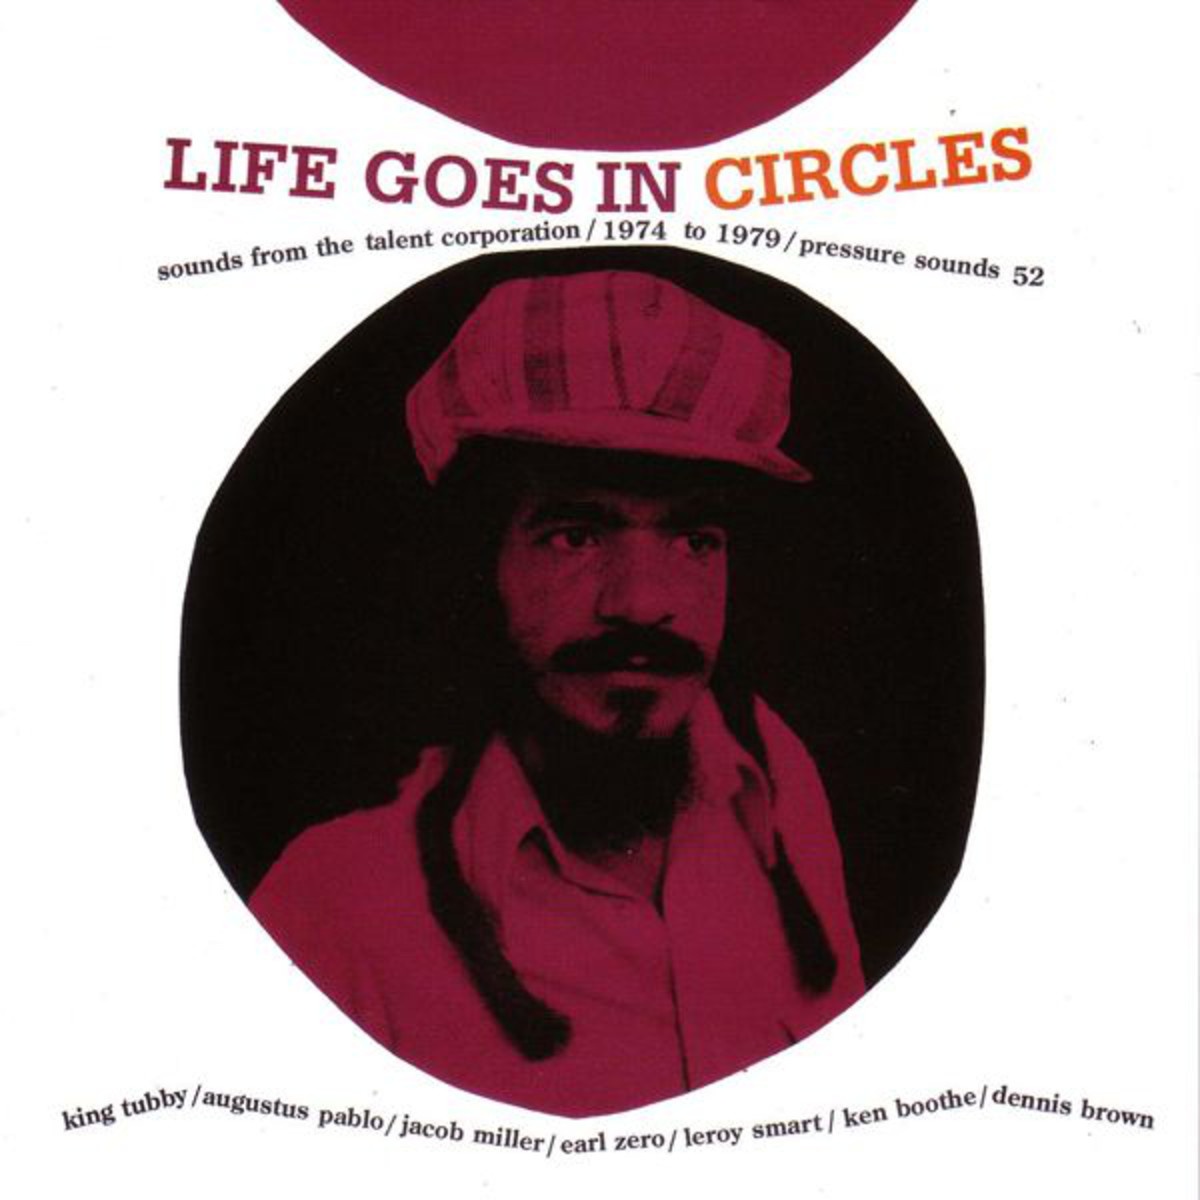 Life Goes In Circles: Sounds From The Talent Corporation / 1974 to 1979